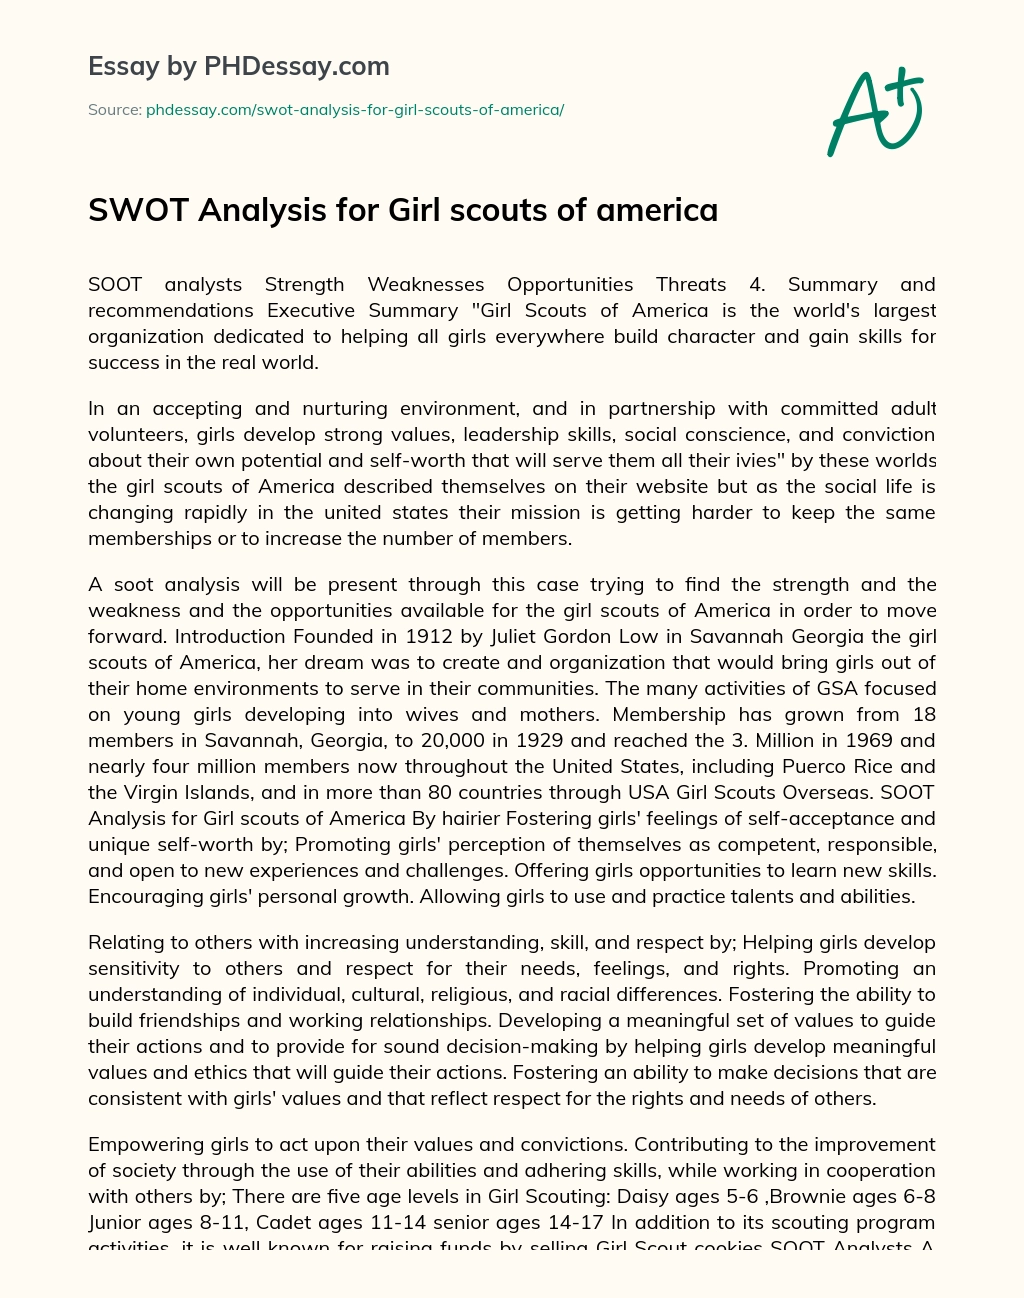 SWOT Analysis for Girl scouts of america essay